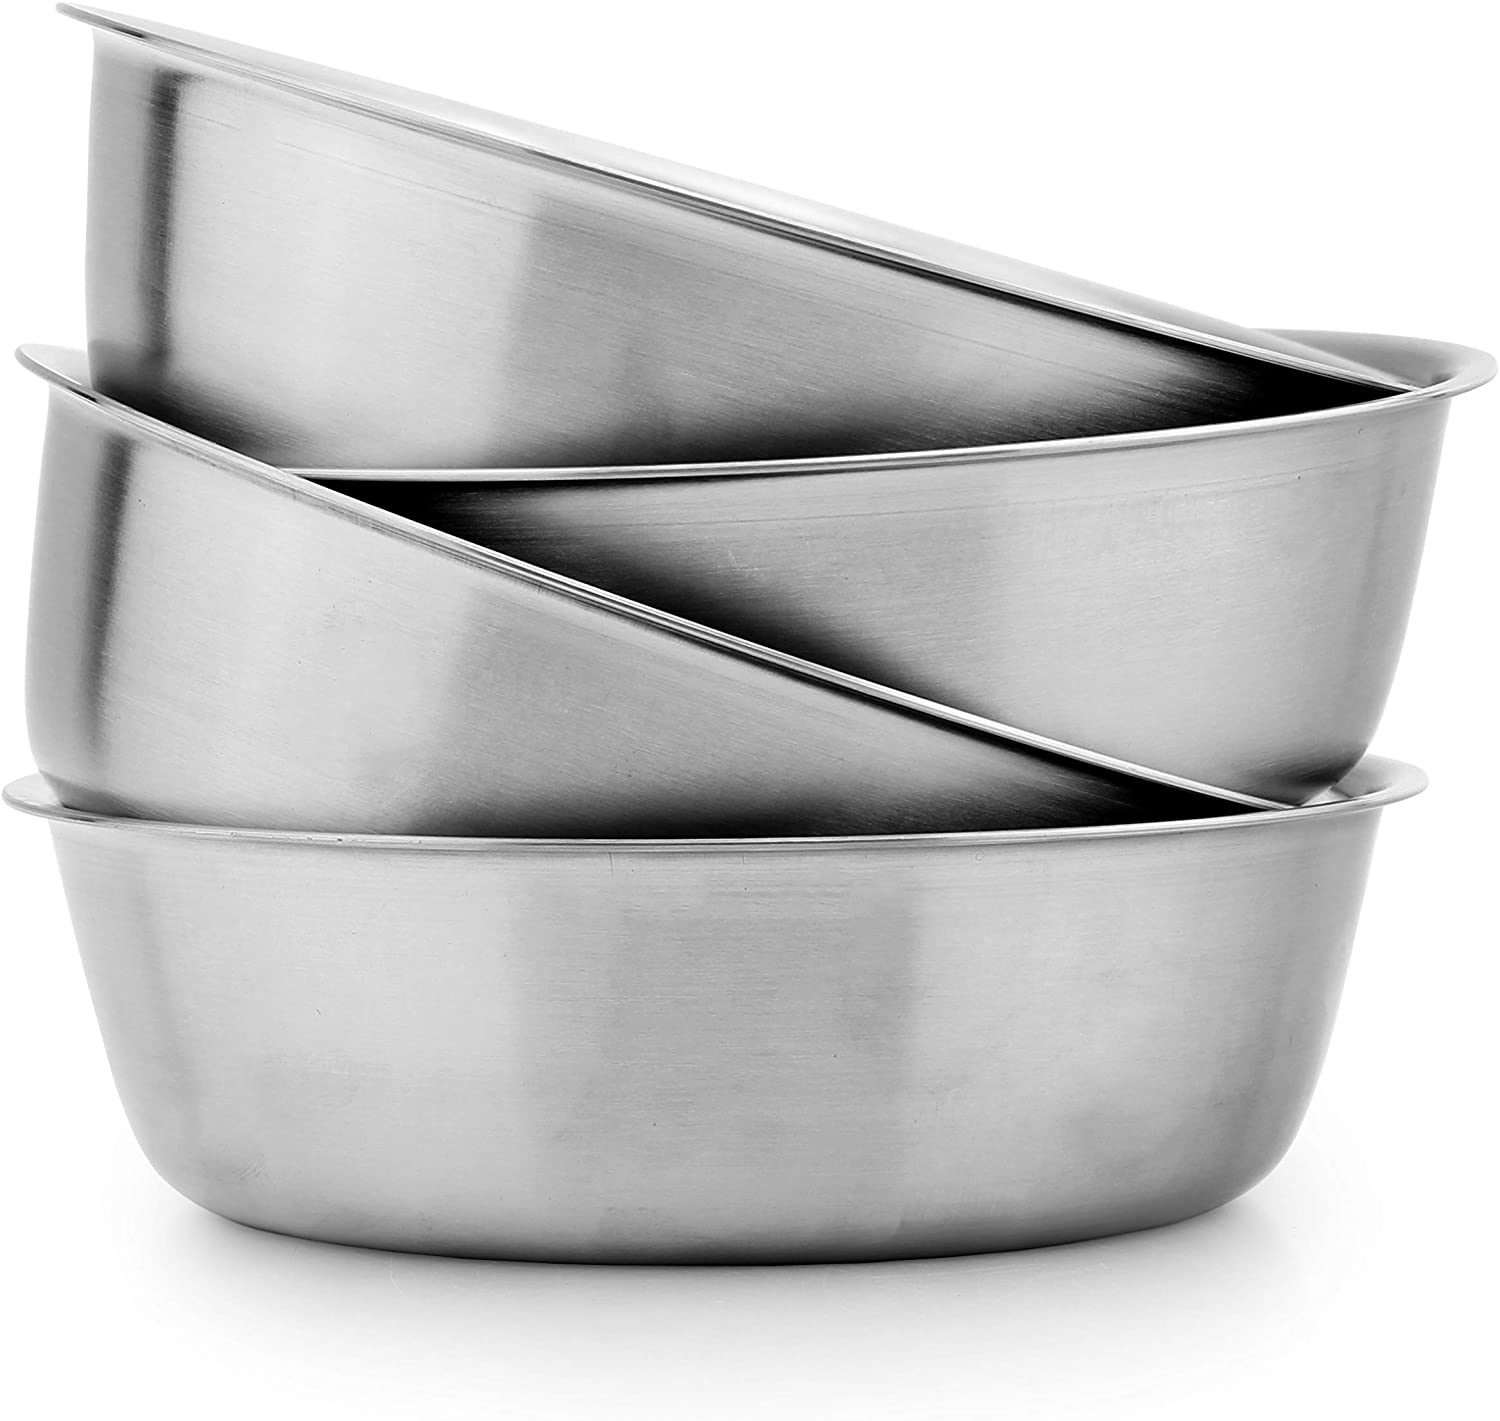 L-5.1inch Premium Heavy Duty Stainless Steel Bowl Stainless Steel Bowls For Baby Kids Adult & Normal Use .Double-walled heat-protection.Pack of 2 